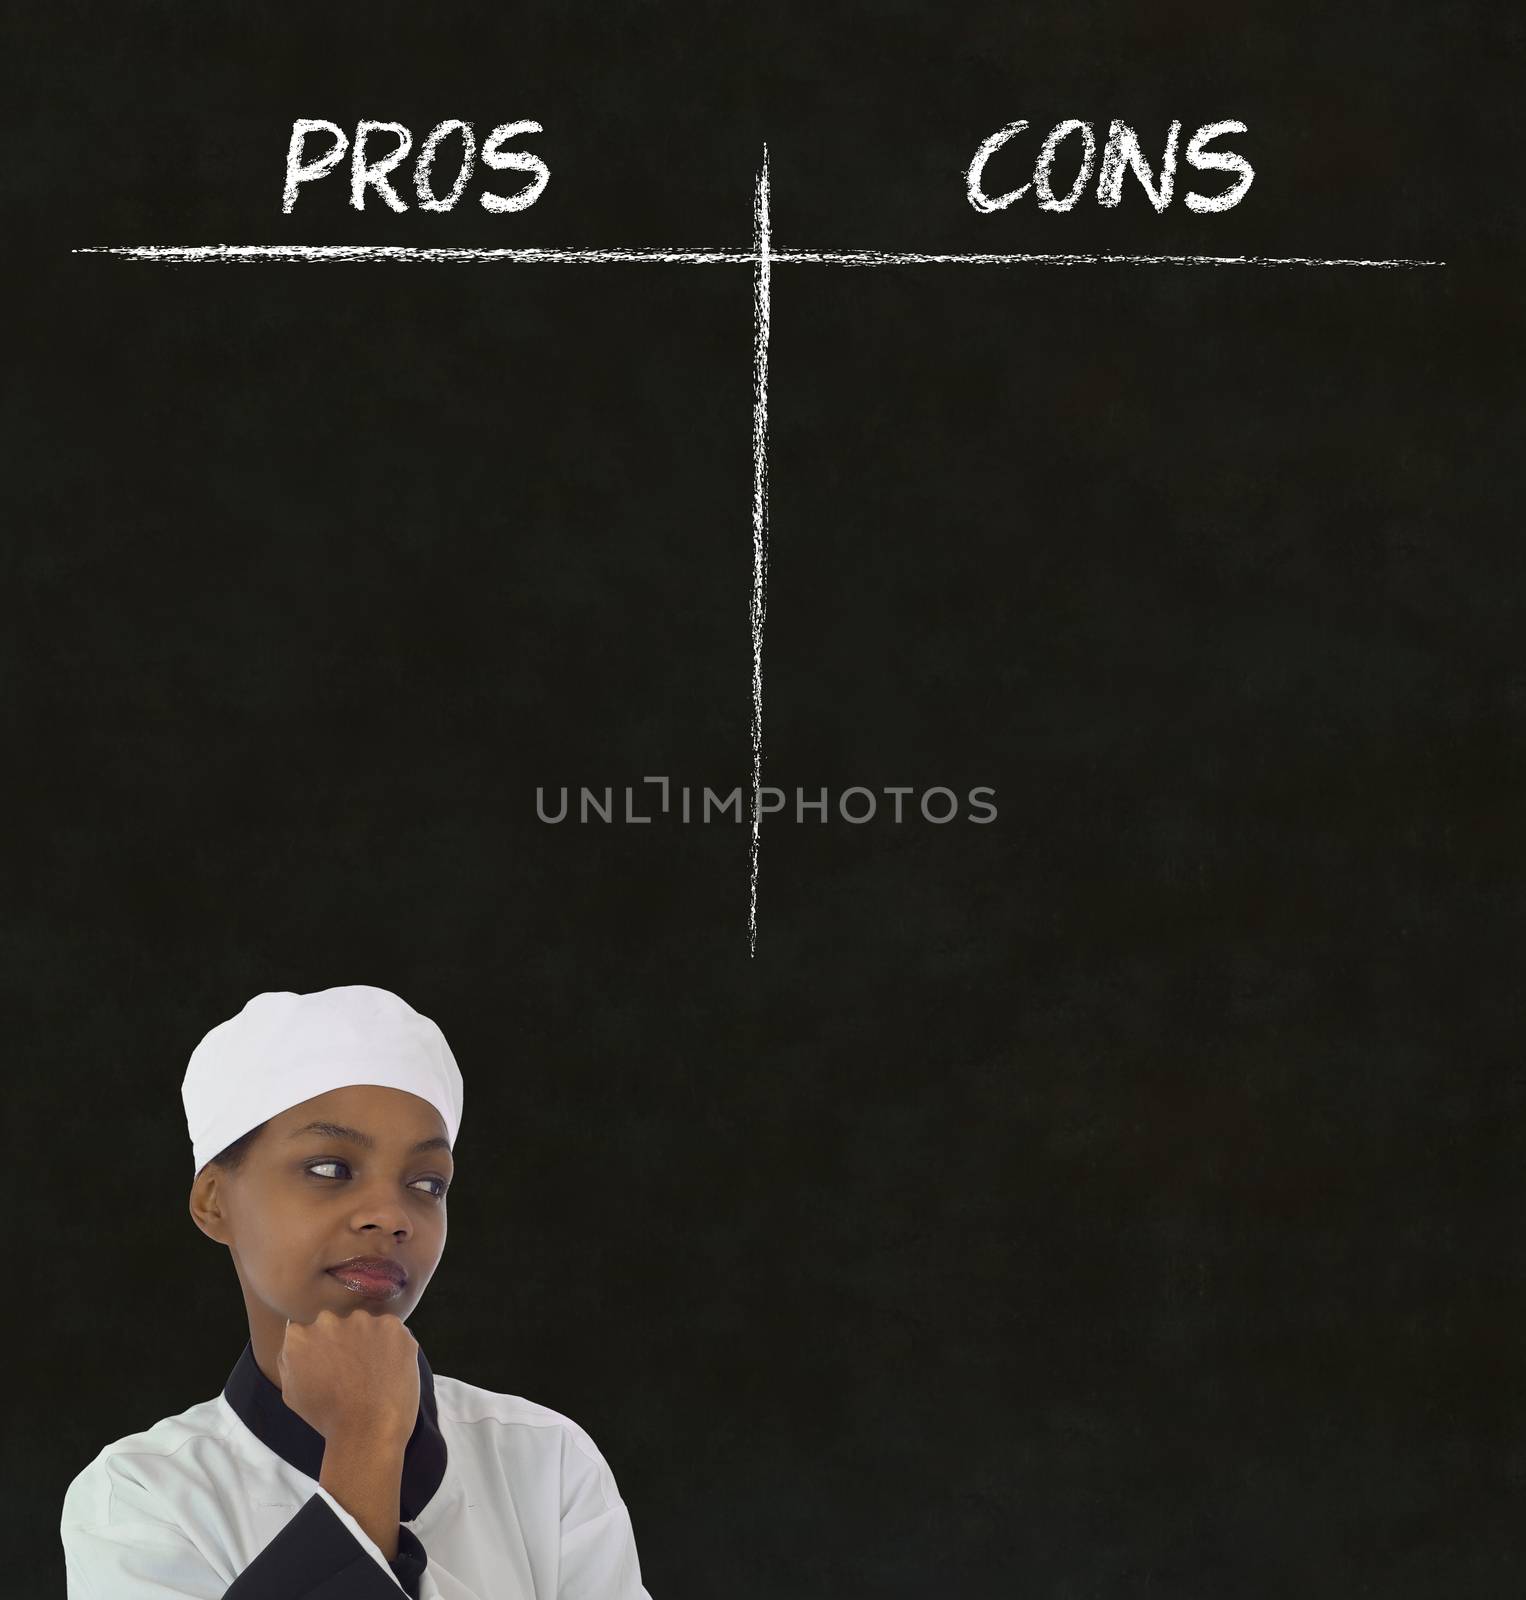 African American woman chef thinking with chalk pros and cons on blackboard background by alistaircotton